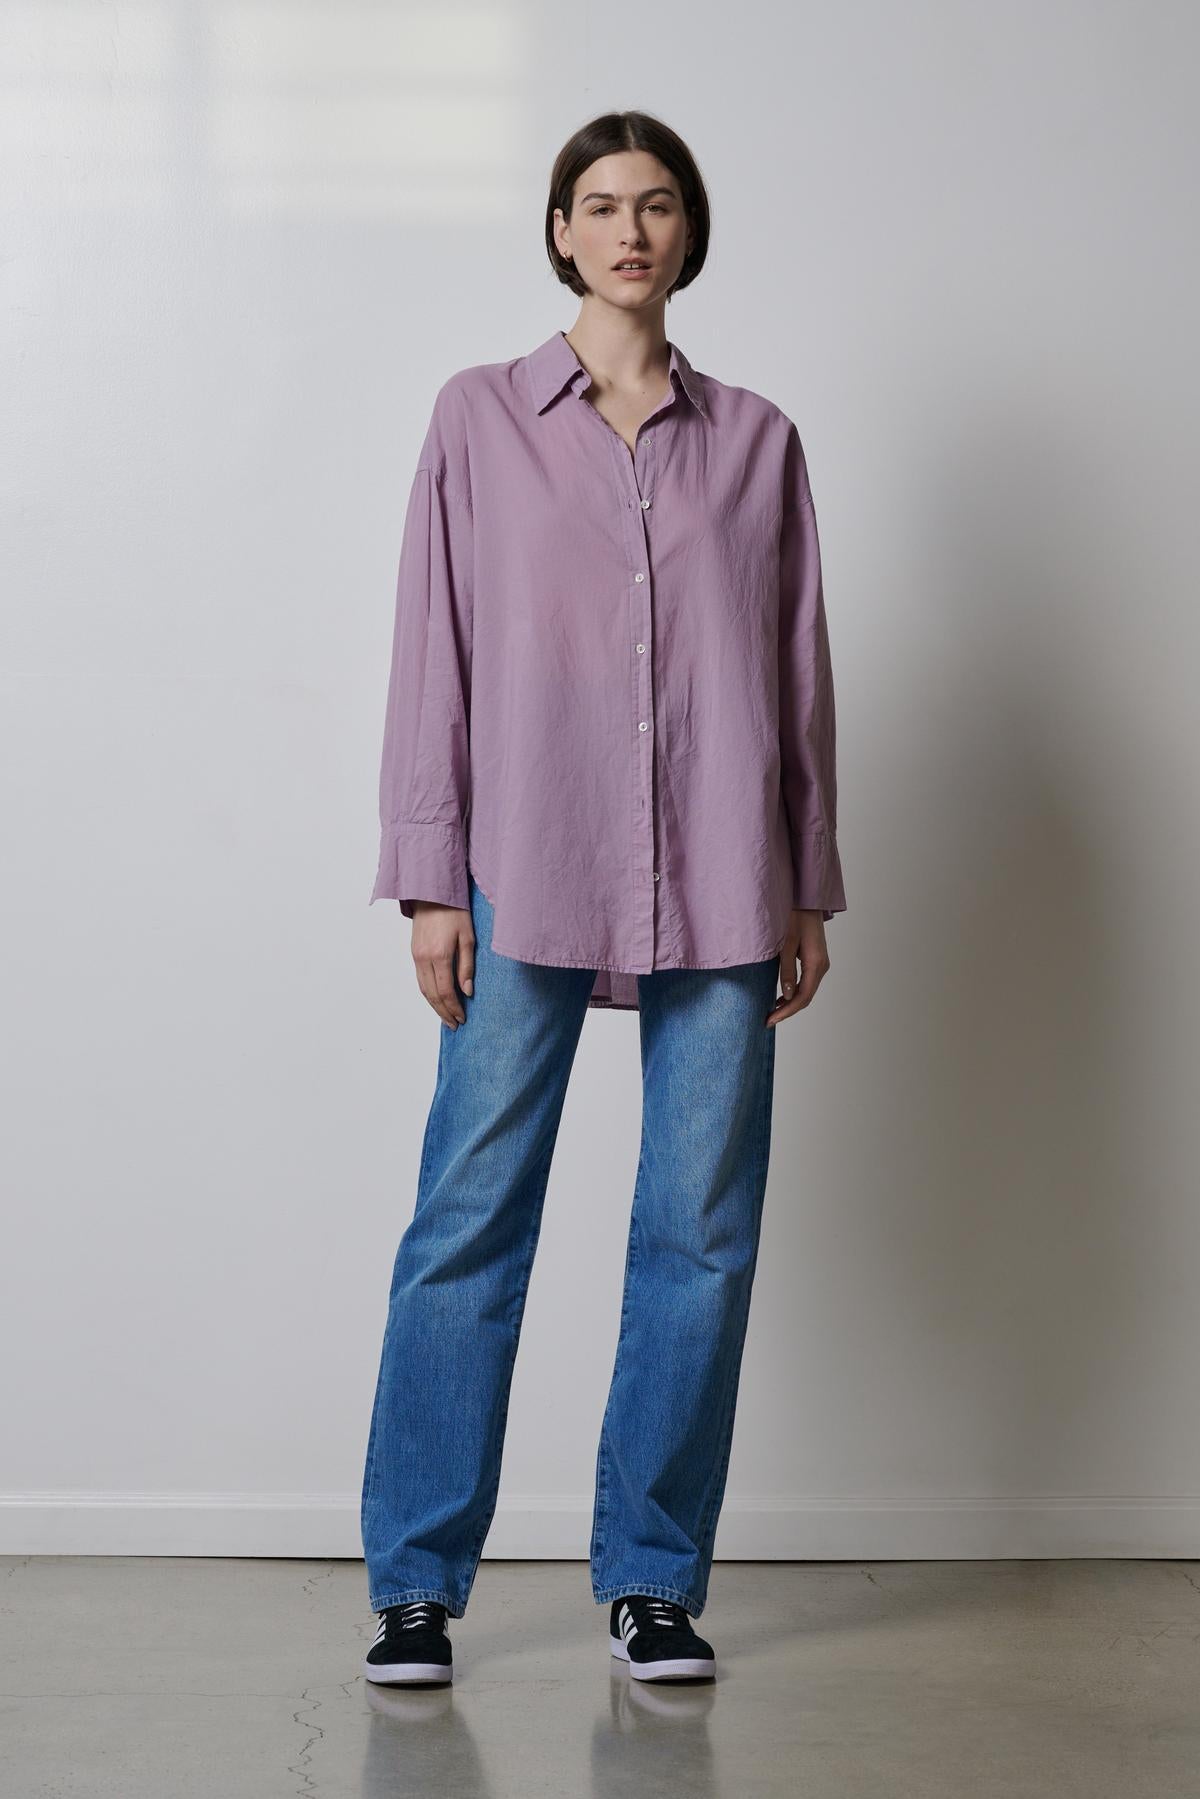   The model is wearing a Velvet by Jenny Graham REDONDO BUTTON-UP SHIRT and blue jeans. 